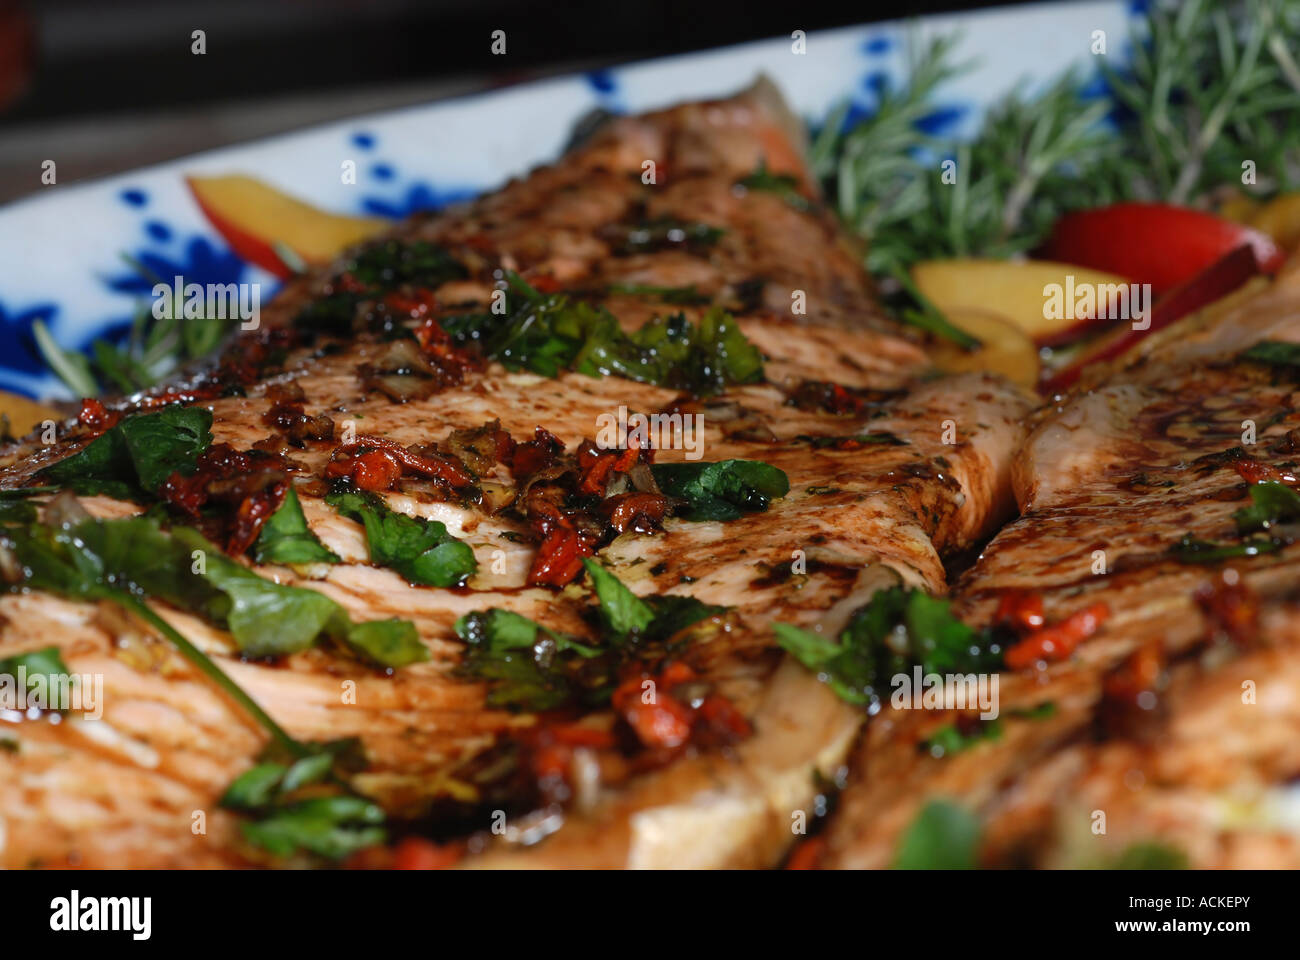 grilled breast of chicken garnished with herbs Stock Photo